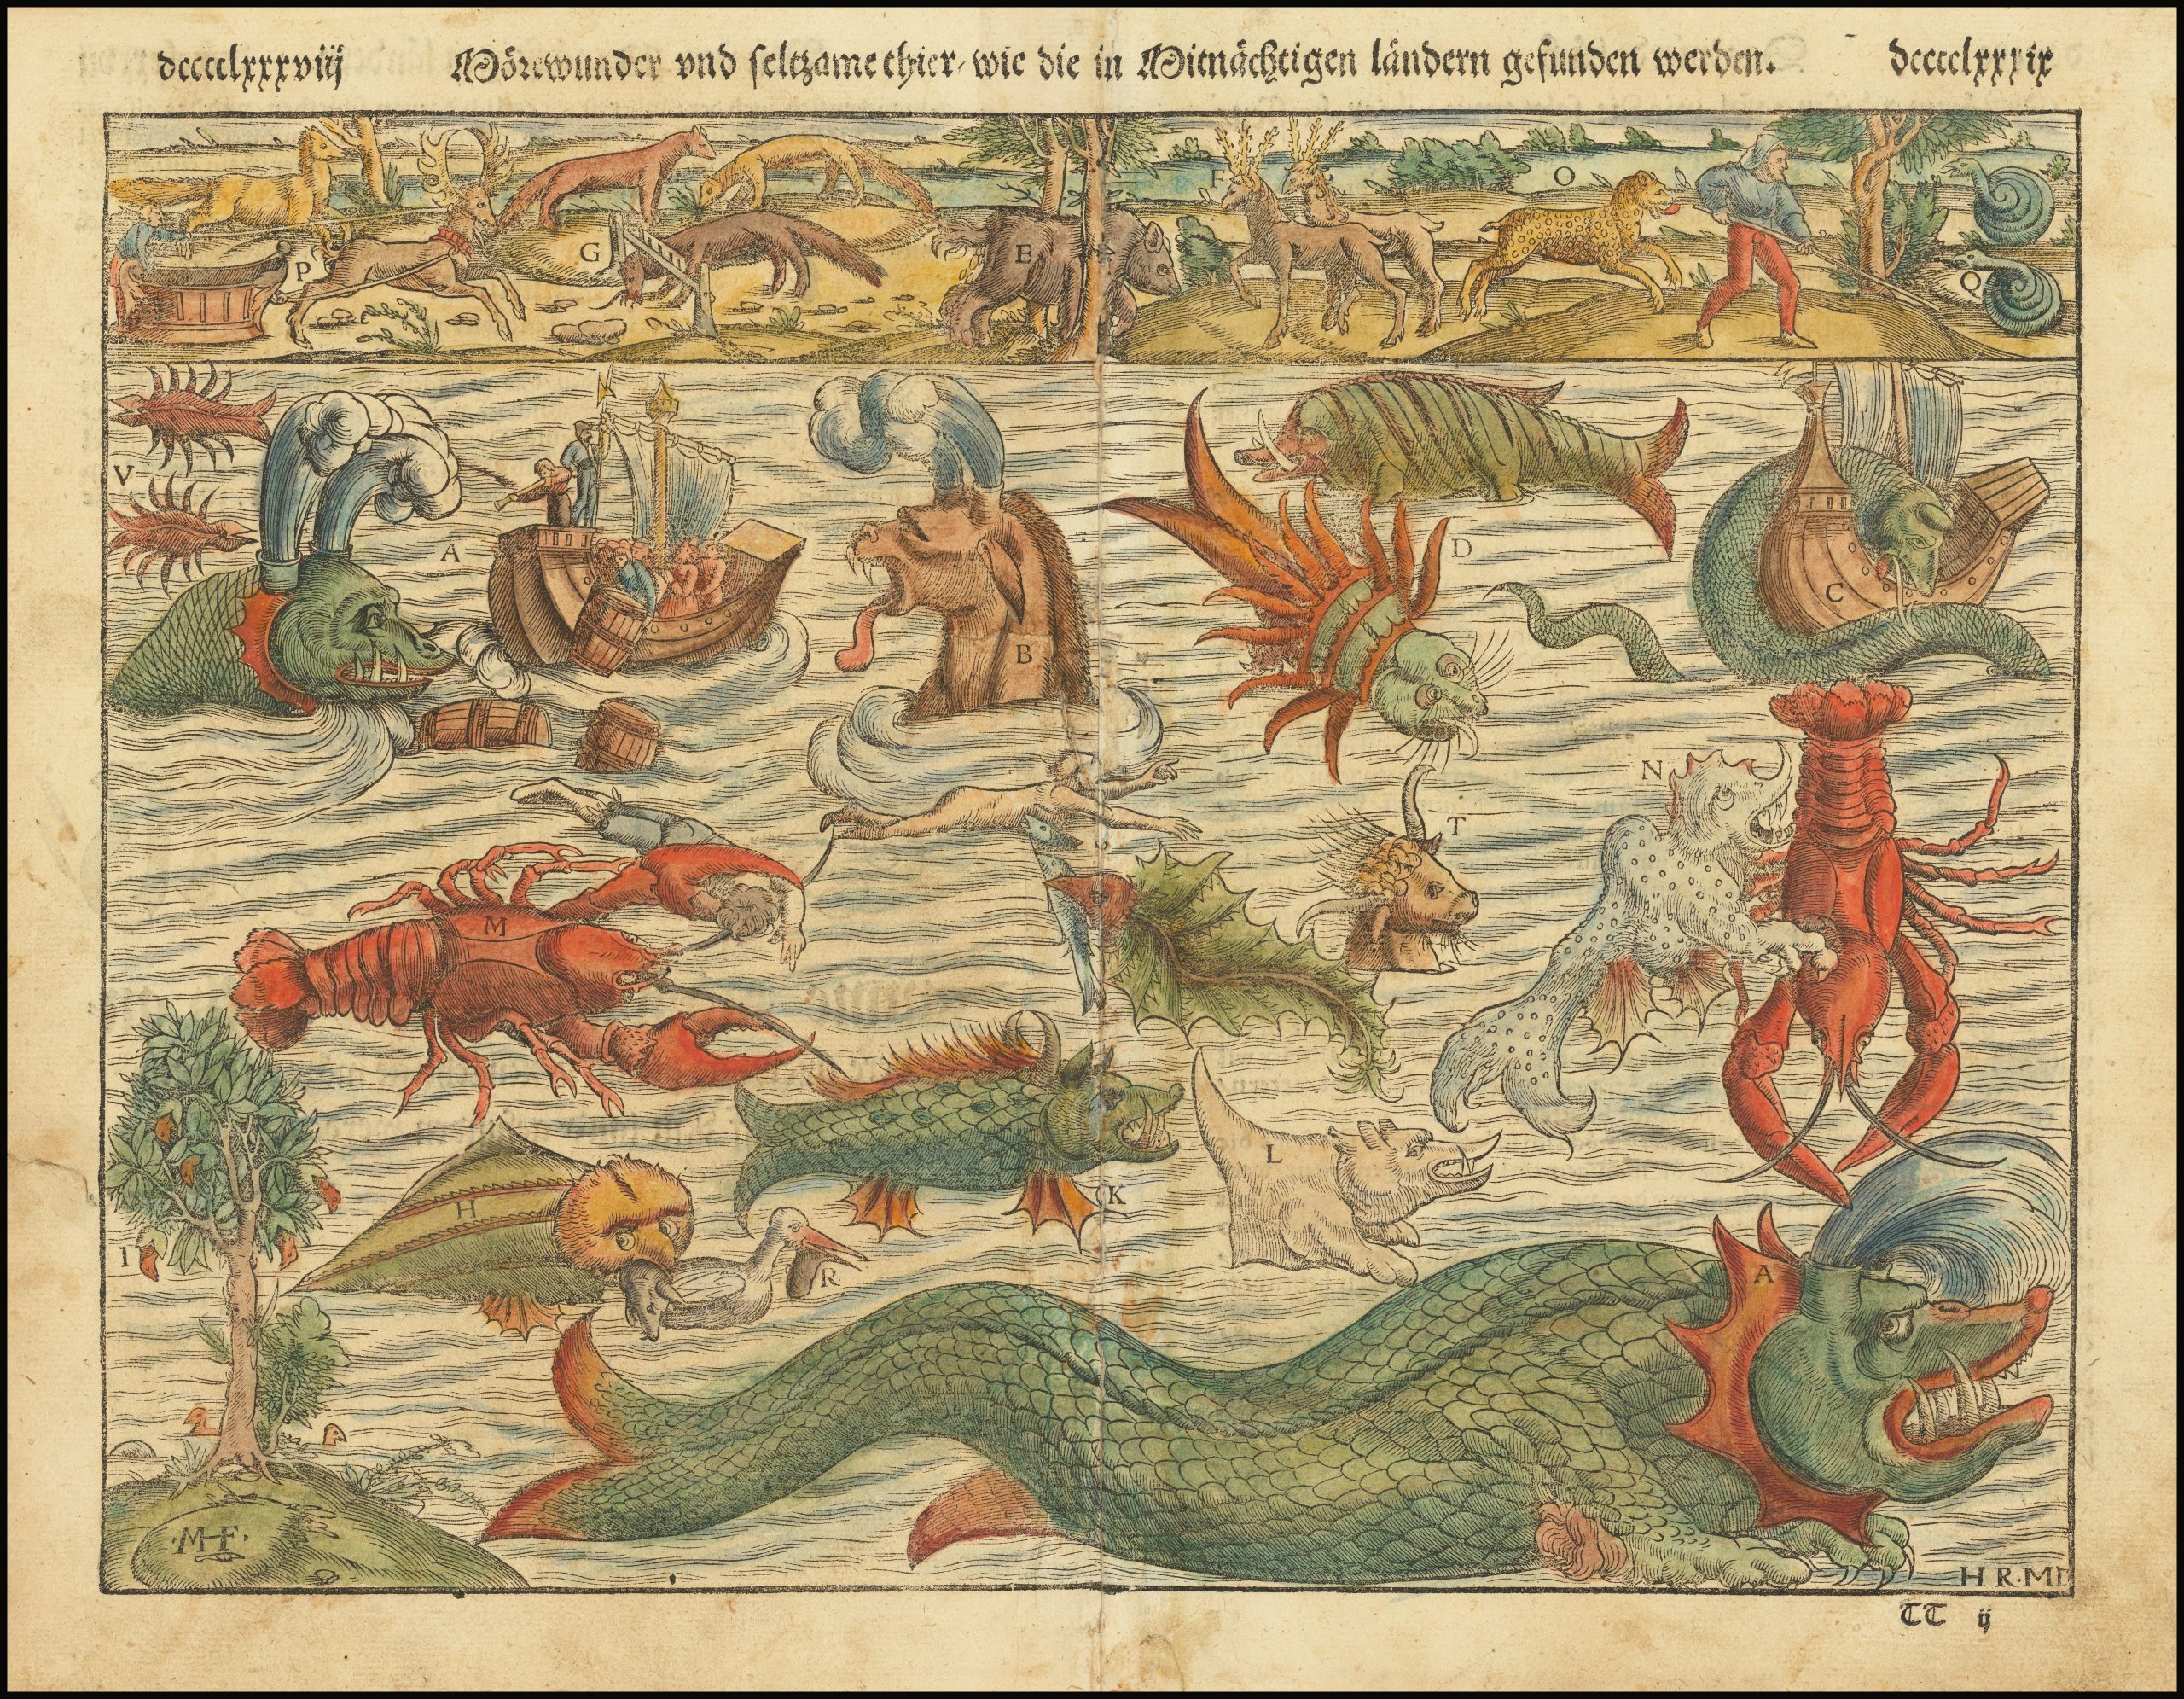 An image filled with several varieties of sea monsters in the water while land creatures stand in the distance.